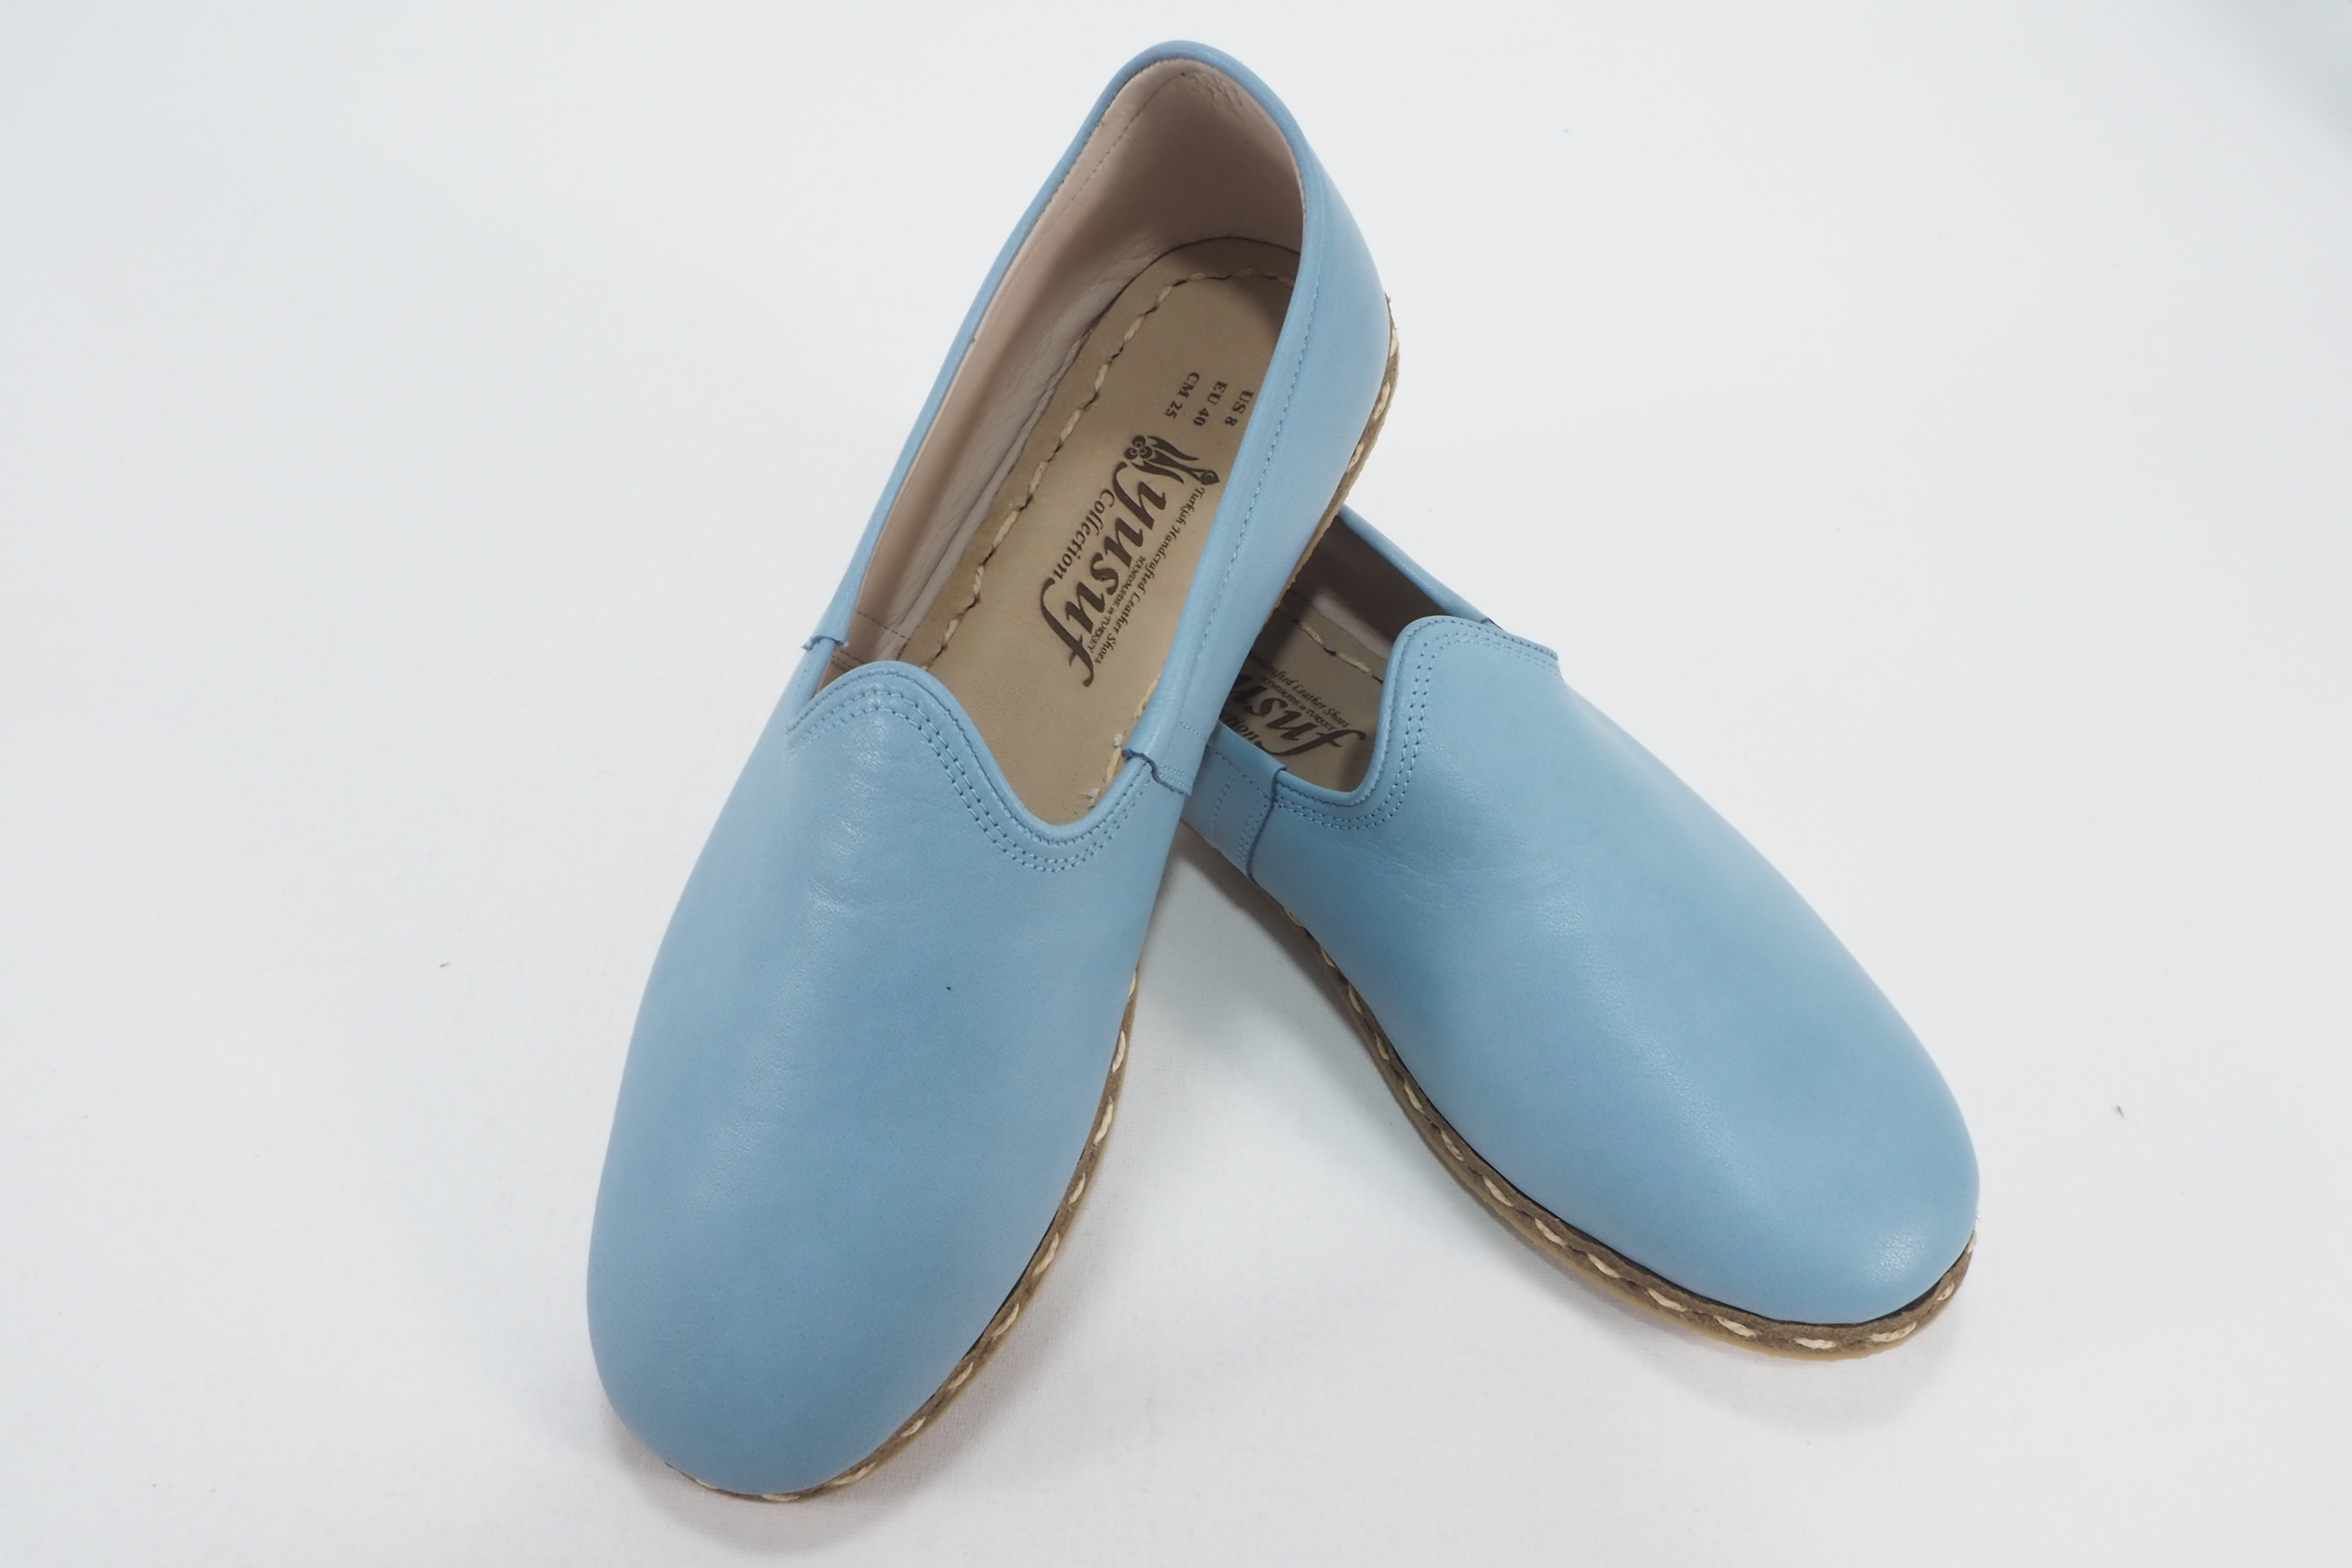 Turkish Flats Shoes Travel Shoes Men/'s Handmade Yemeni Shoes Light Blue Leather Summer Loafers